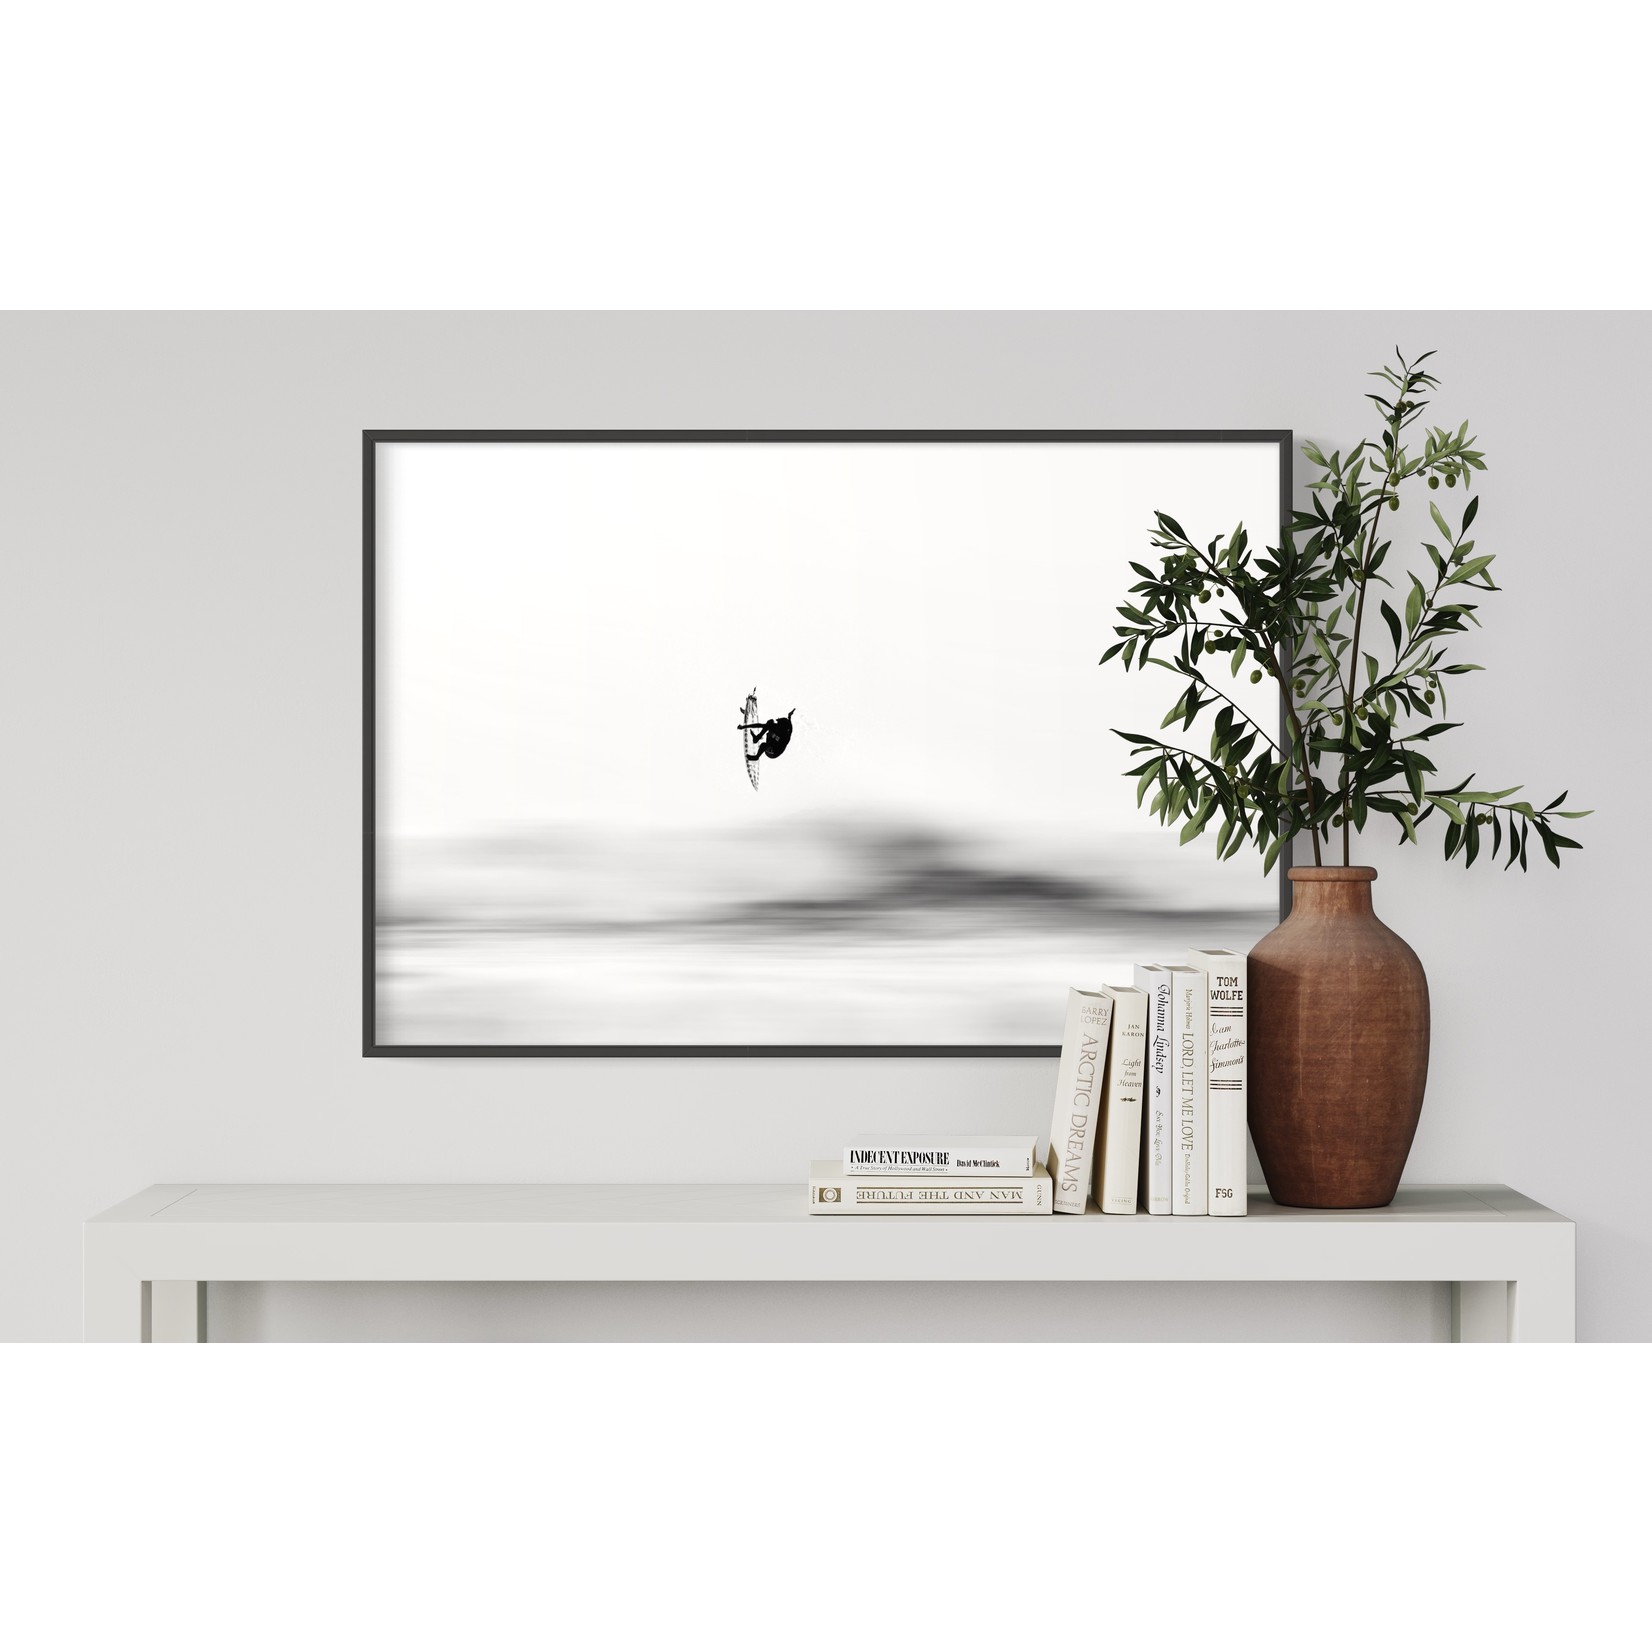 The Picturalist | Fine Art Print on Rag Paper Up High by Enric Gener